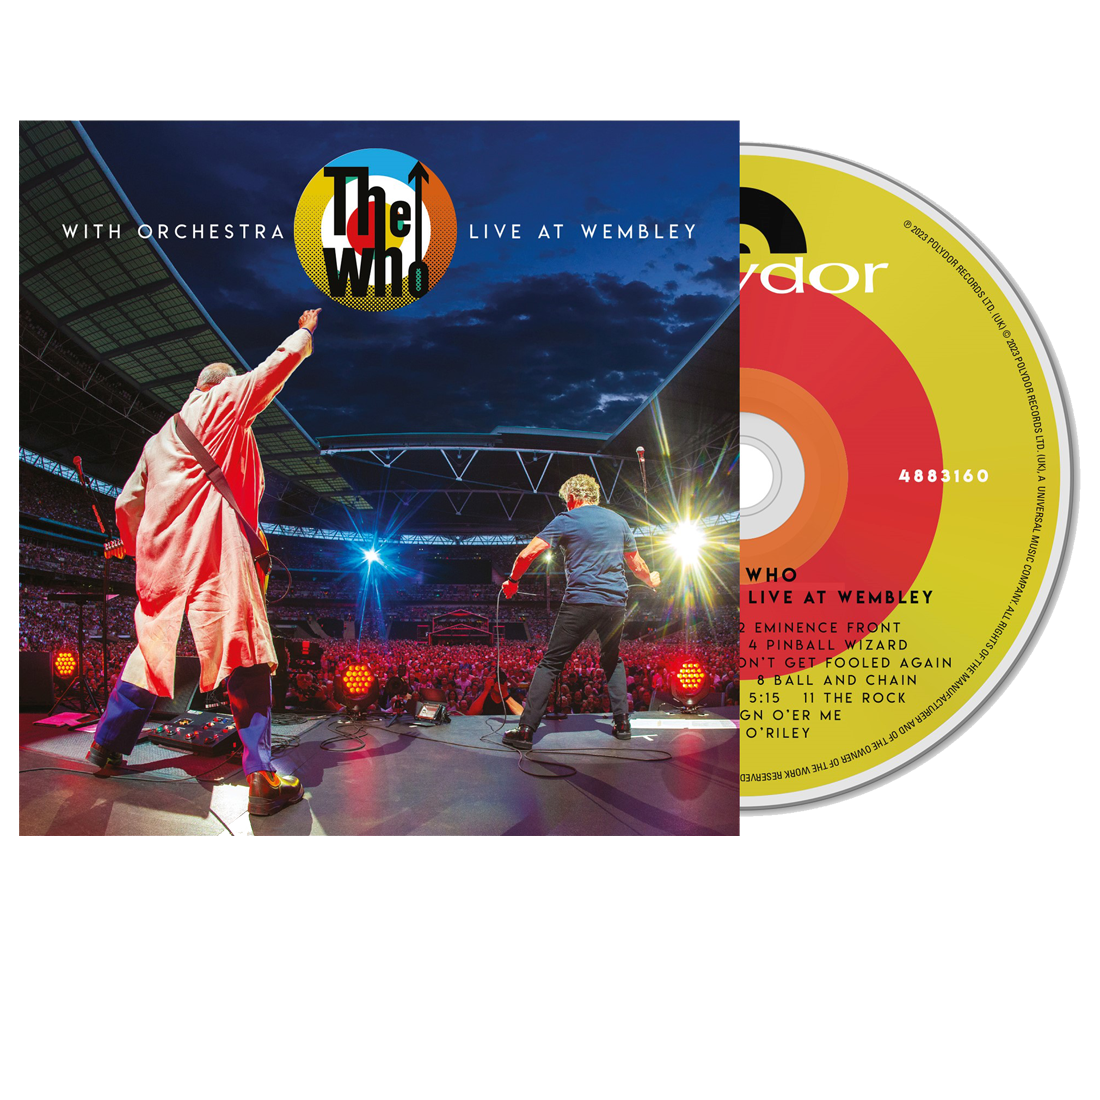 The Who - The Who With Orchestra - Live At Wembley: CD